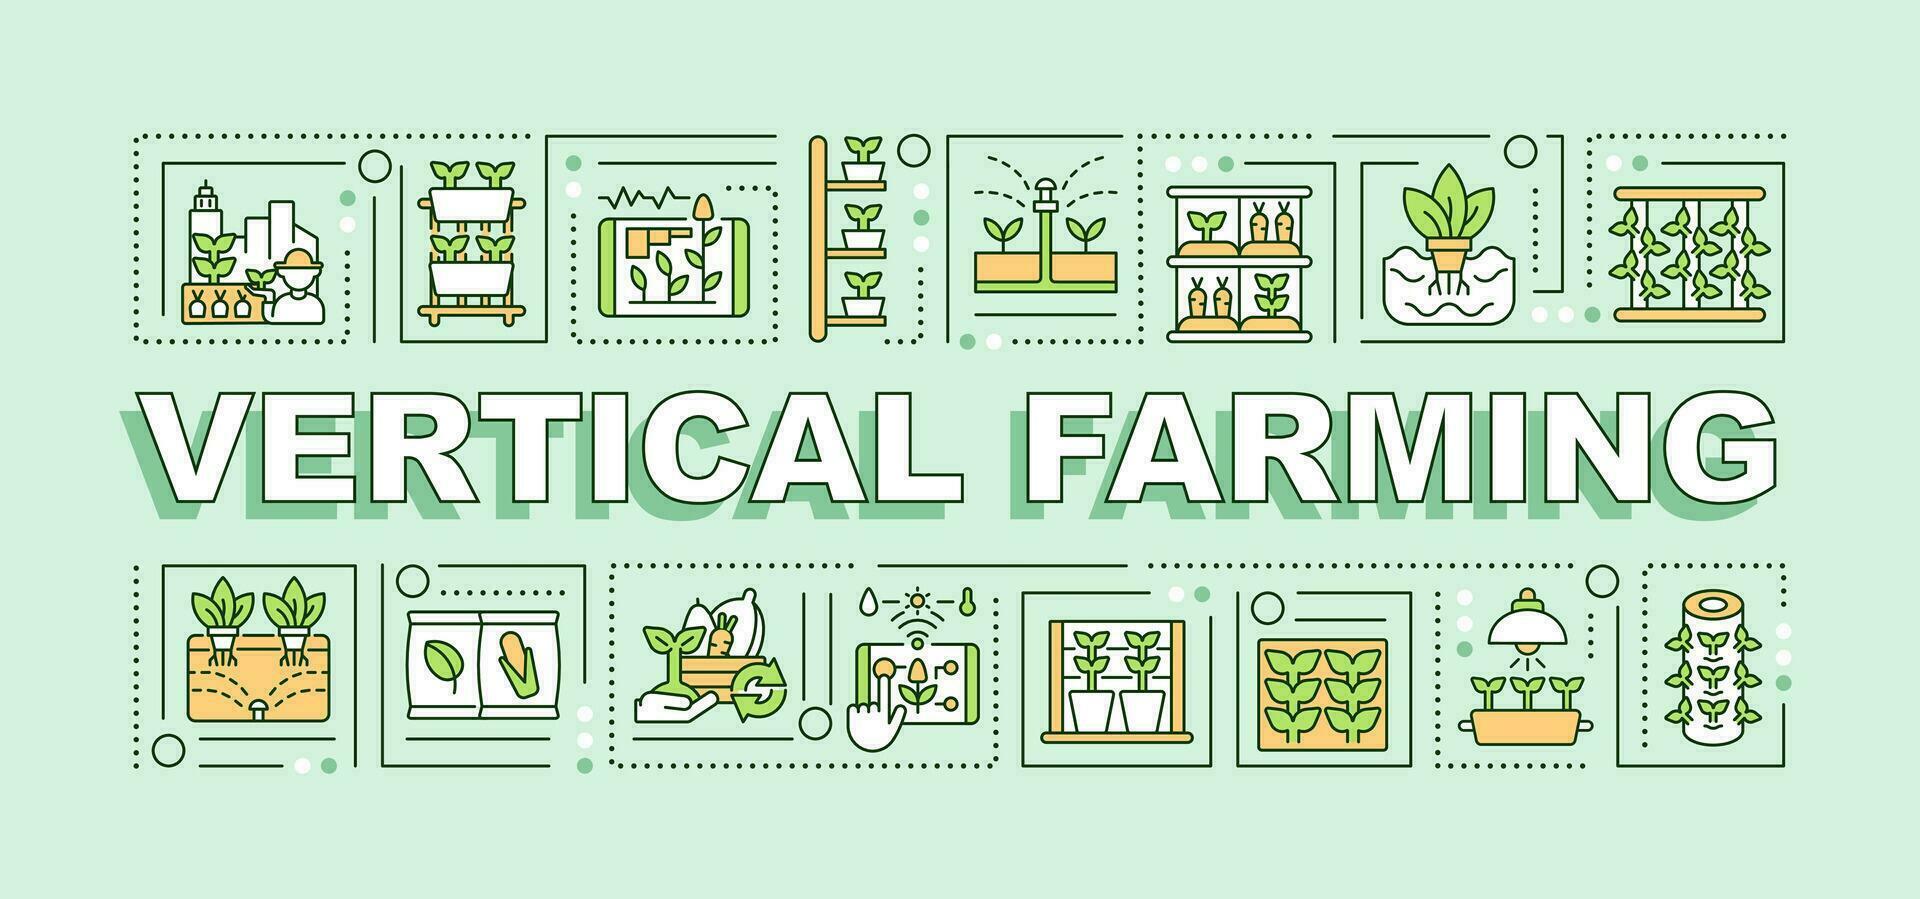 Vertical farming text with various icons on green monochromatic background, editable 2D vector illustration.